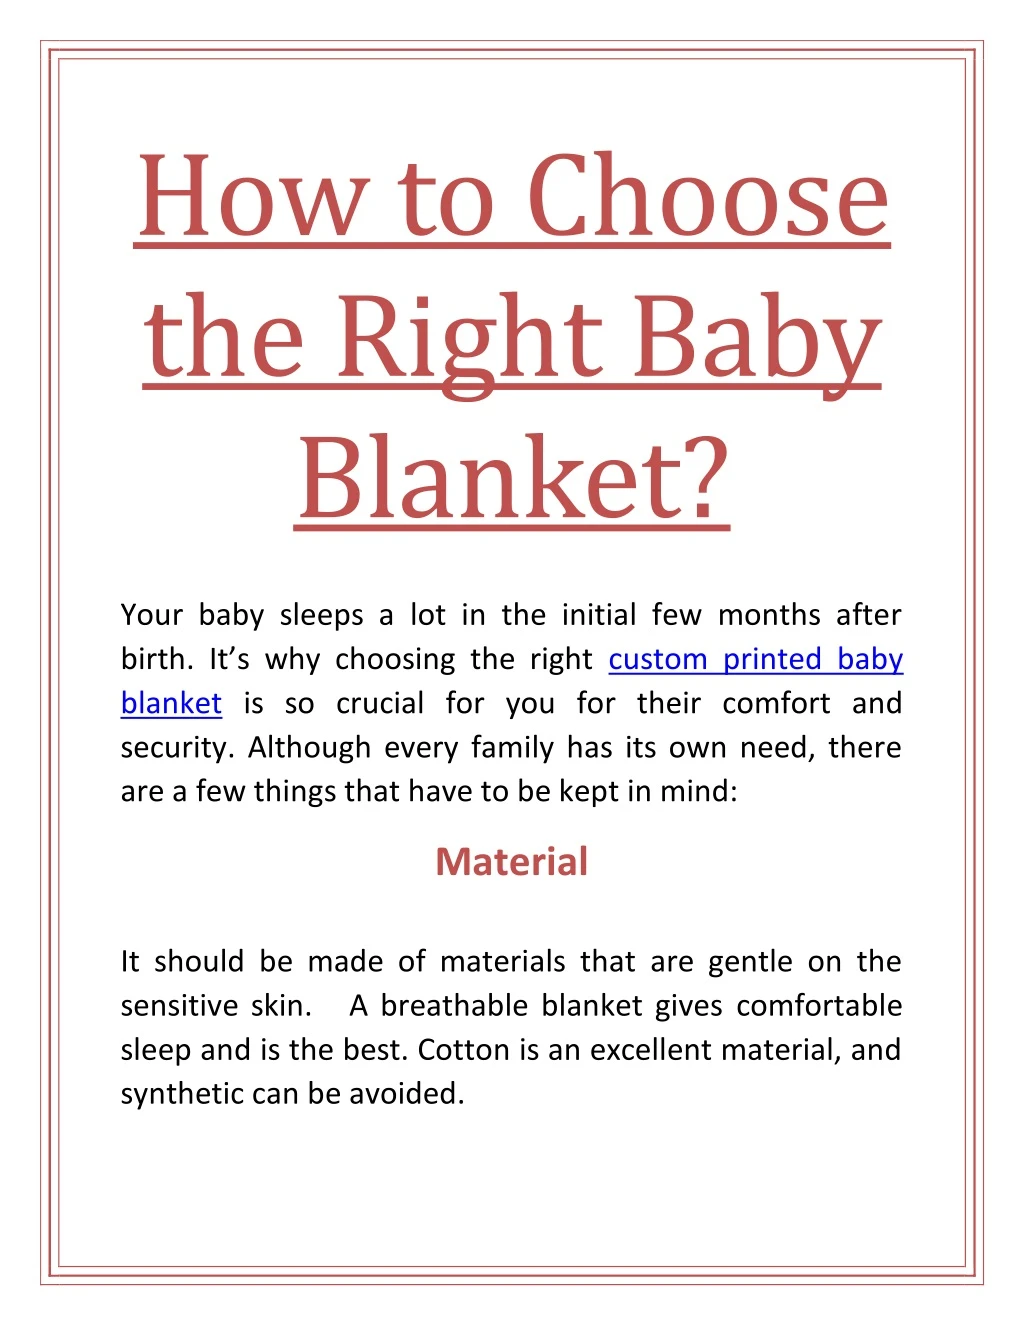 how to choose the right baby blanket